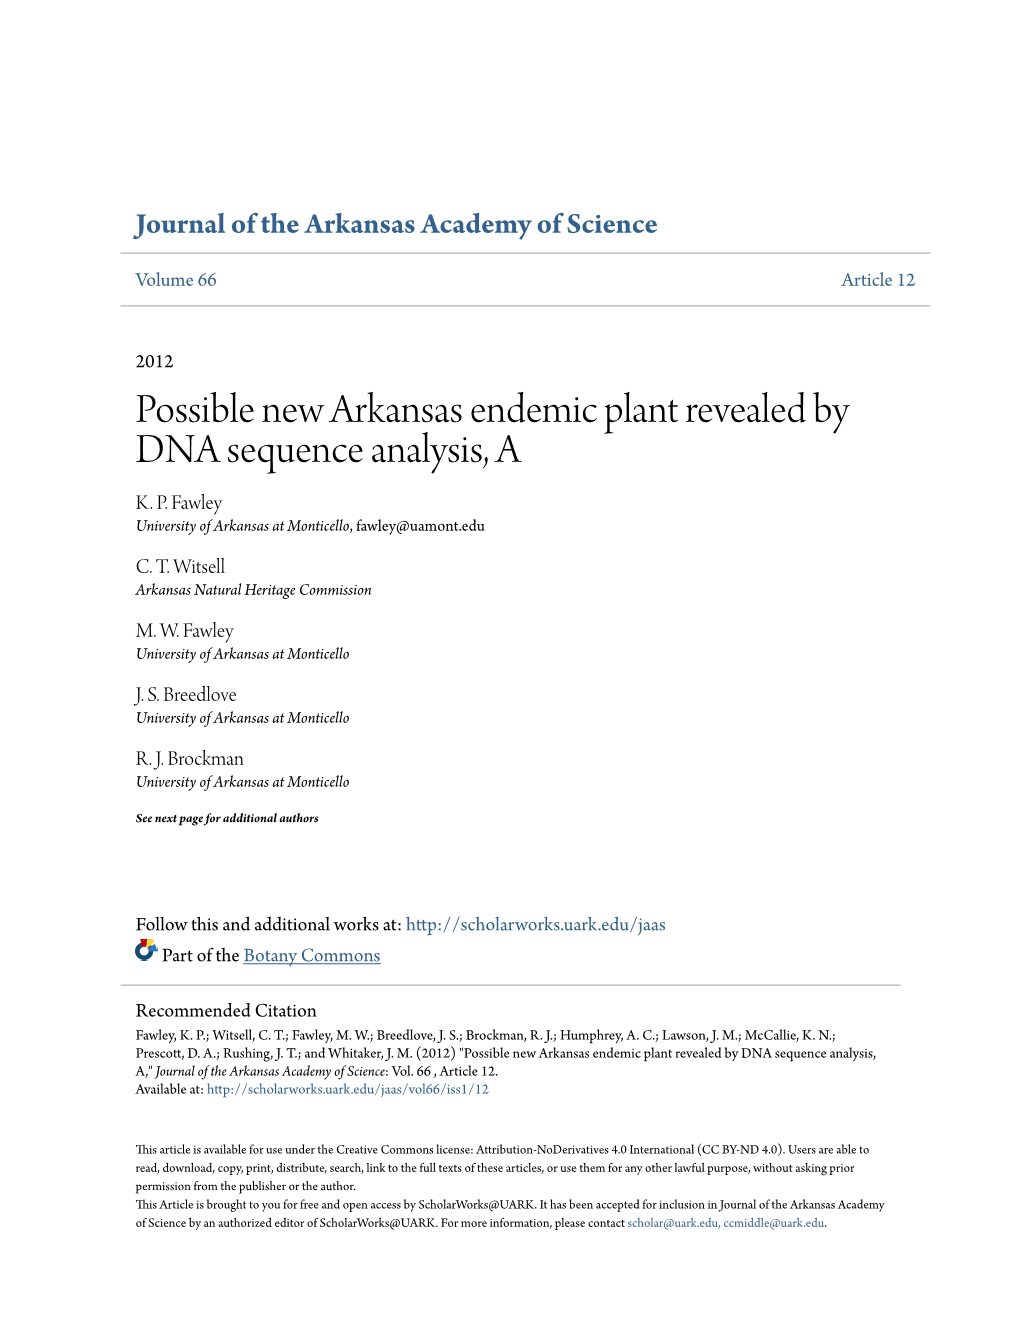 Possible New Arkansas Endemic Plant Revealed by DNA Sequence Analysis, a K